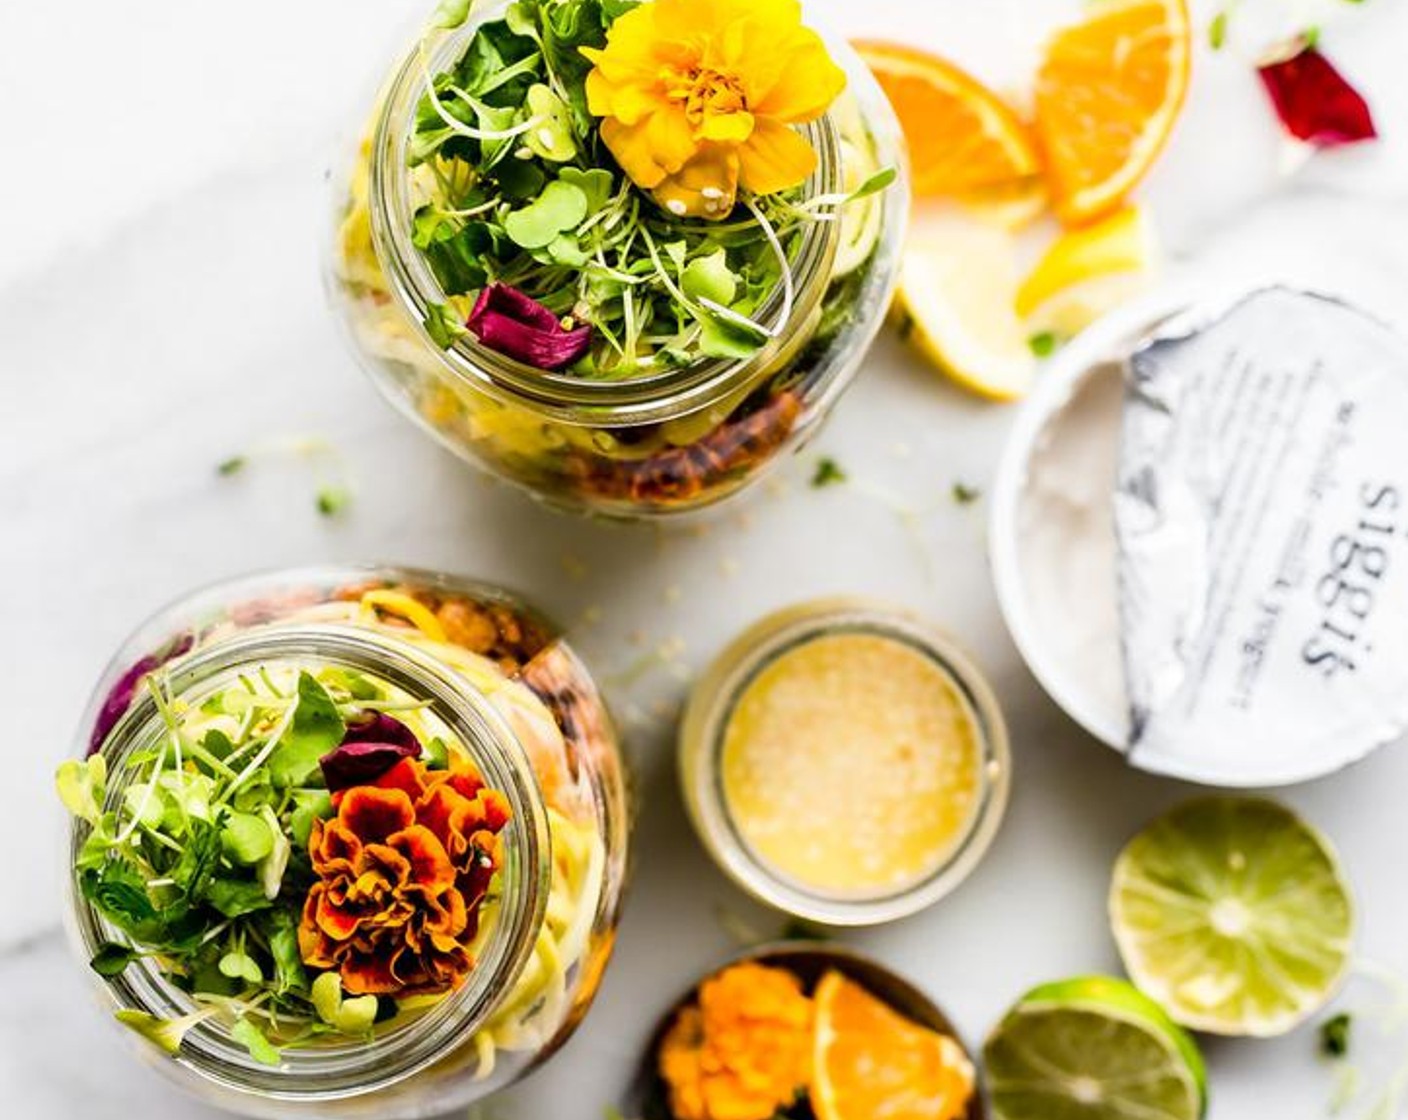 step 3 For the salads, layer half the amount into each jar. Start with the dressing on the bottom, then Quinoa (1 cup), Salad Greens (1 cup), Oranges (3 slices), Canned Chickpeas (1/3 cup), Brussels Sprouts (1 cup), and Summer Squash.